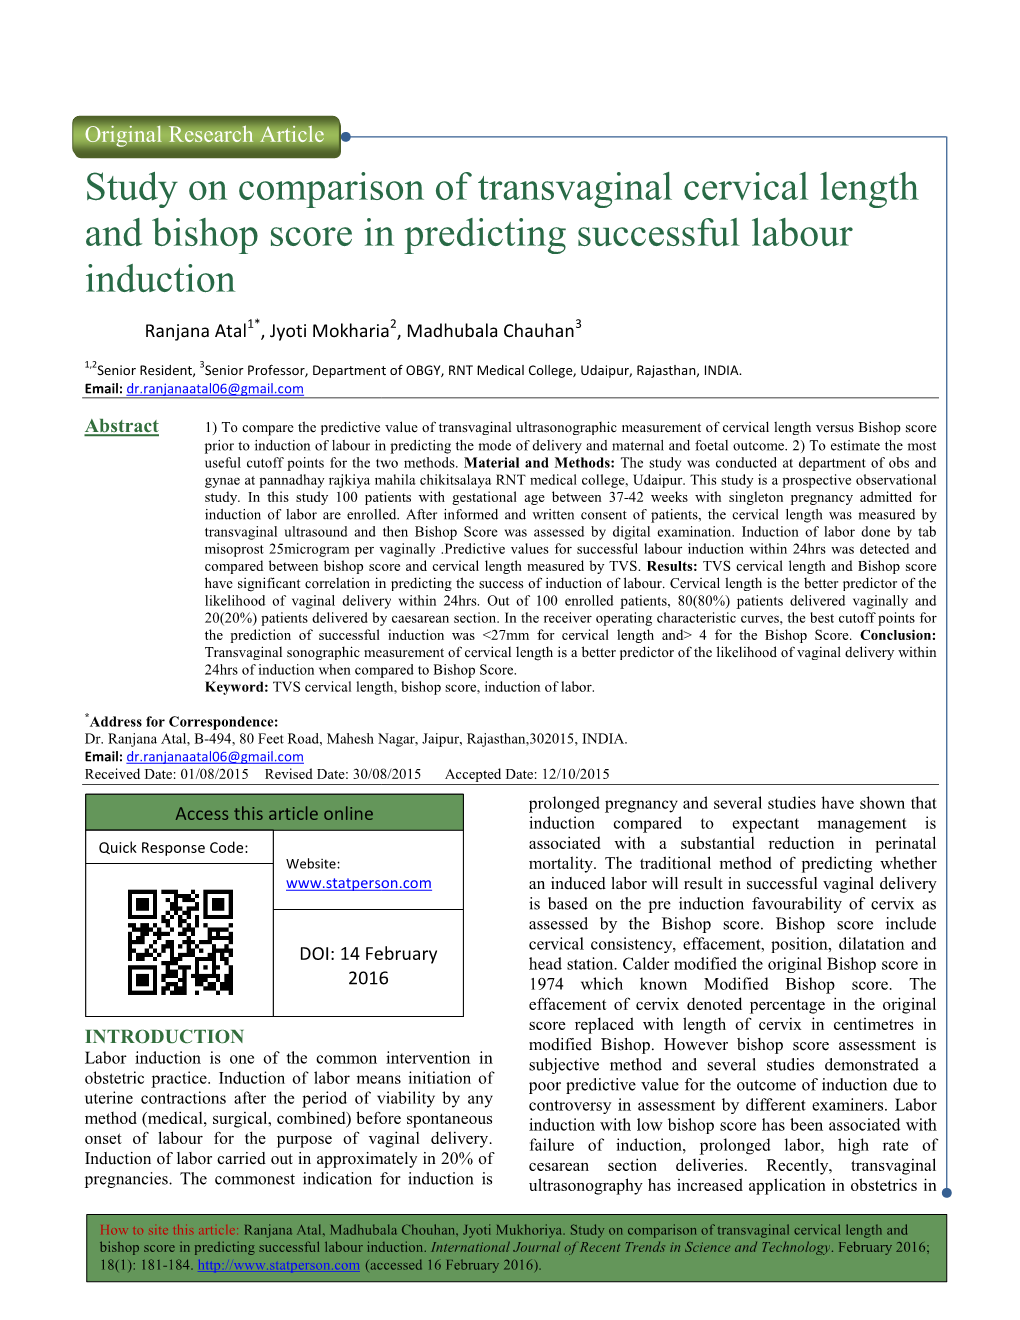 On Comparison of Transvaginal Cervical Length Shop Score in Predicting